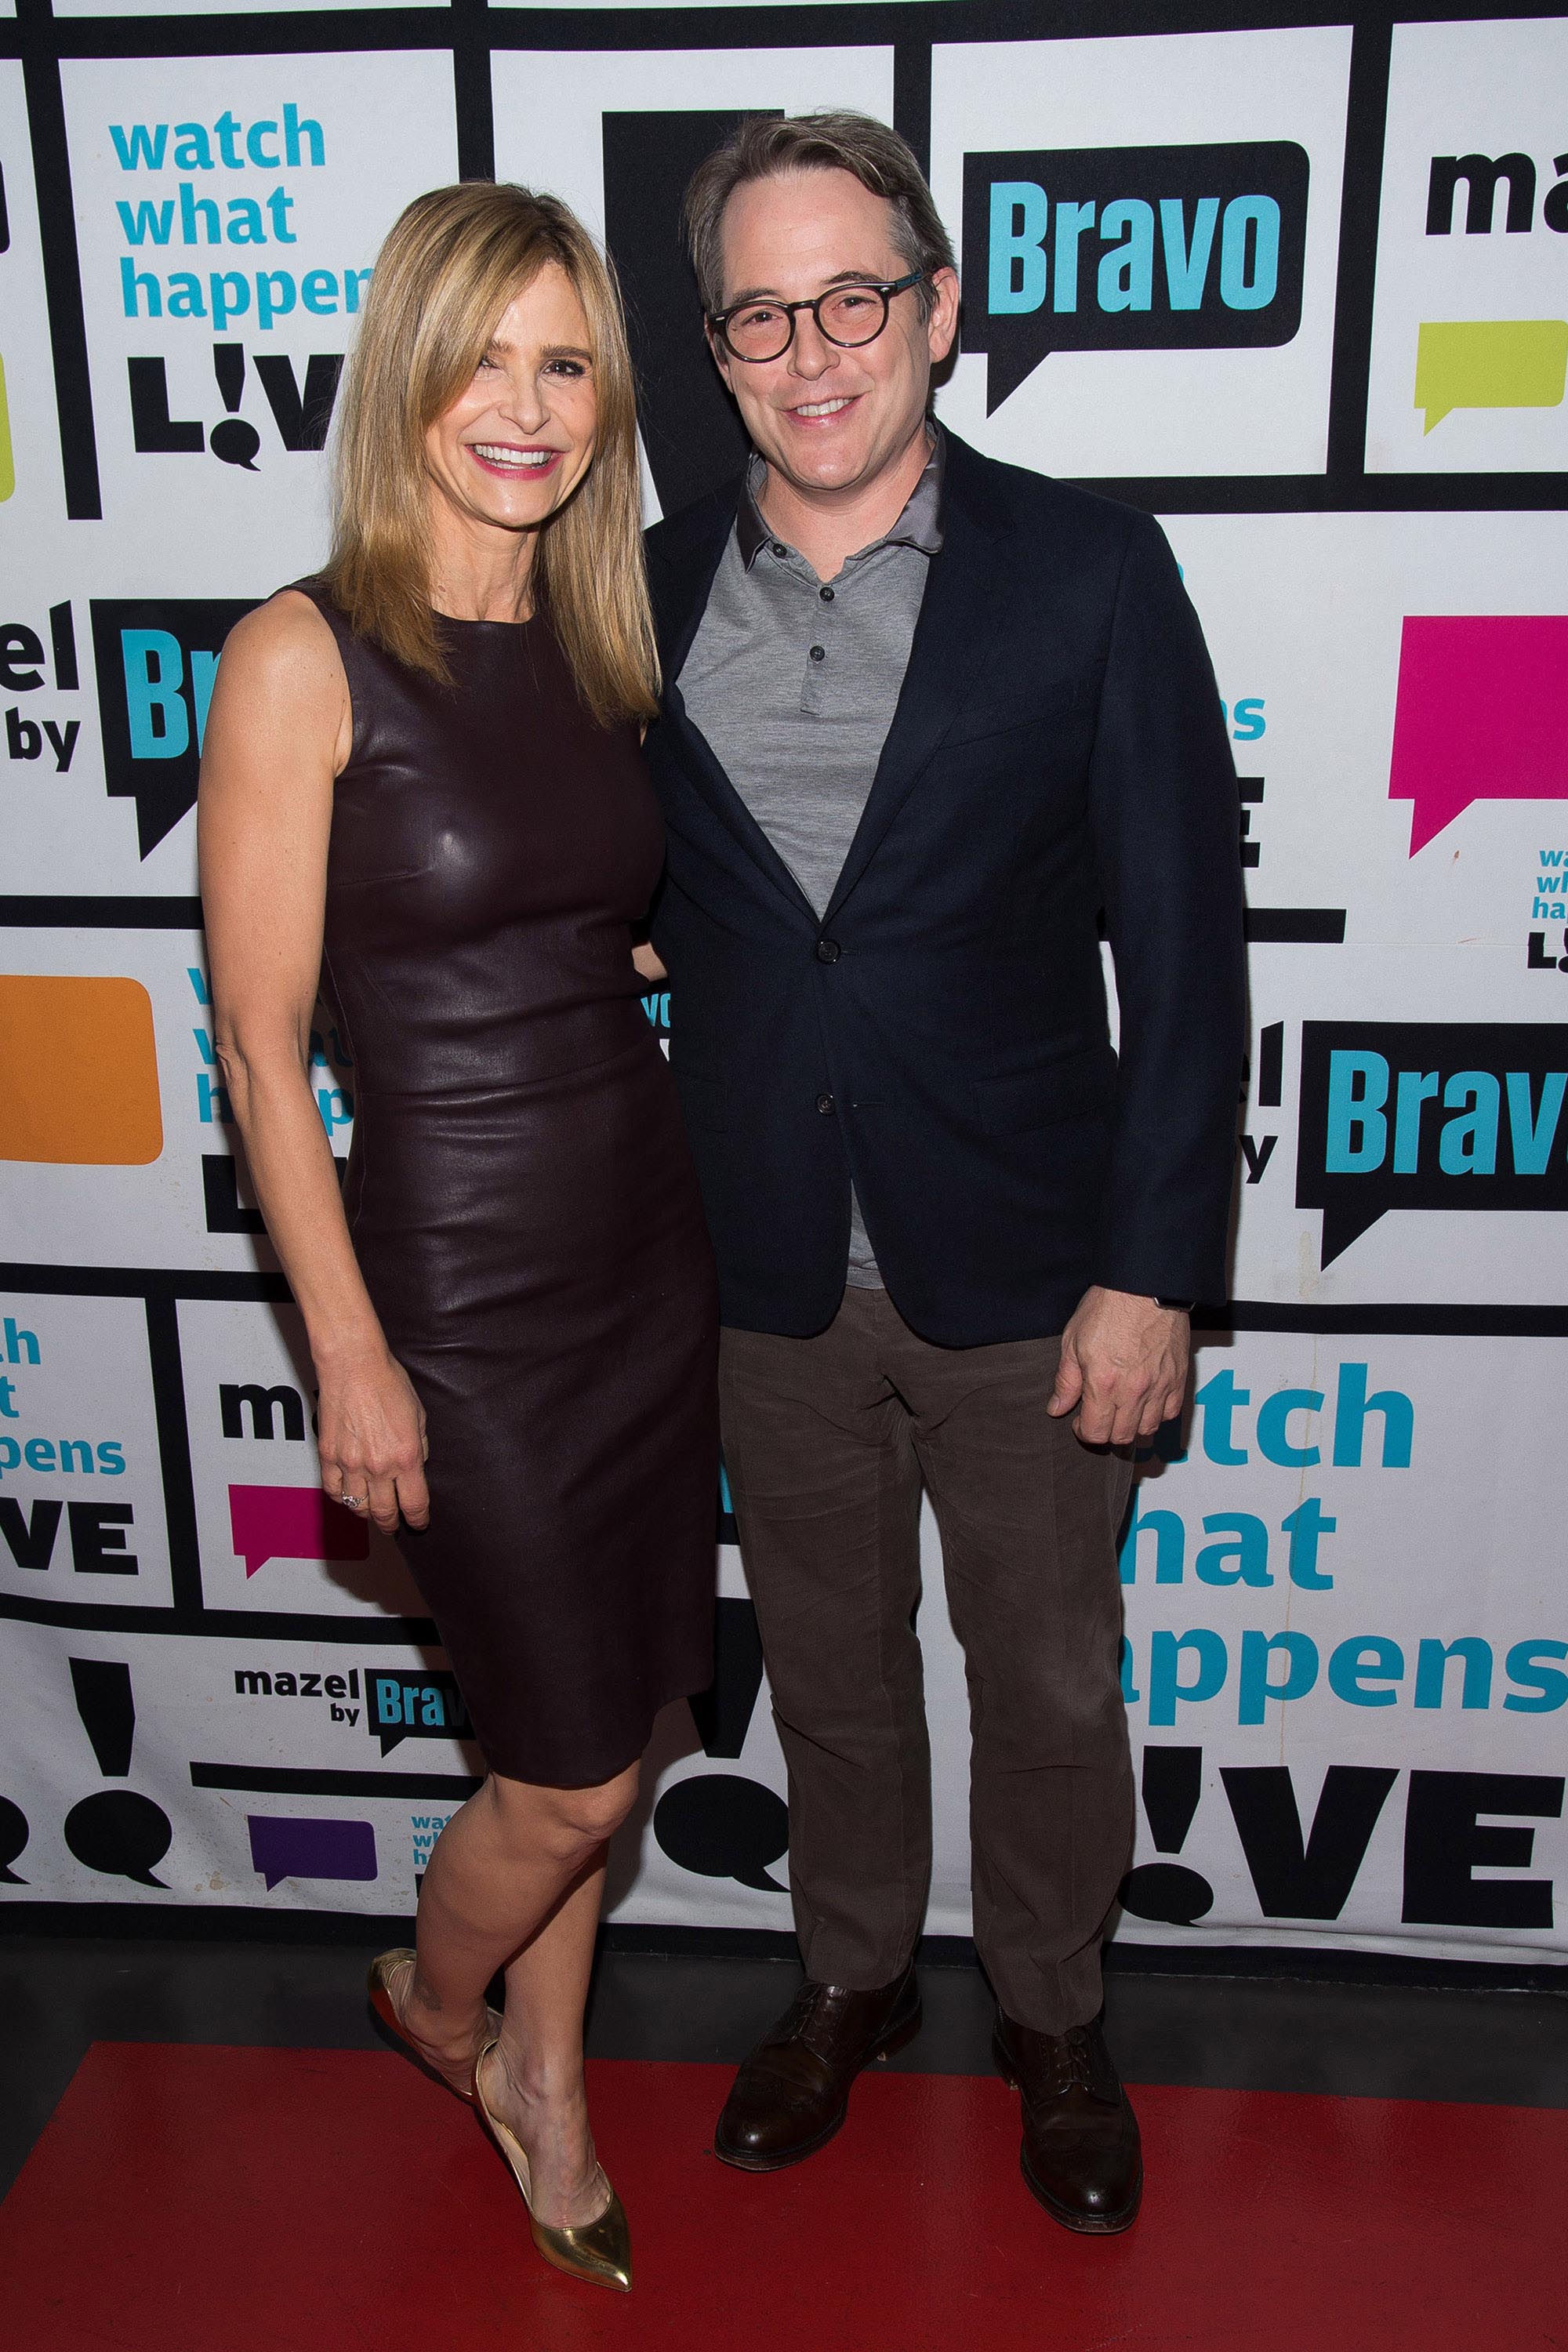 Kyra Sedgwick at Watch What Happens Live